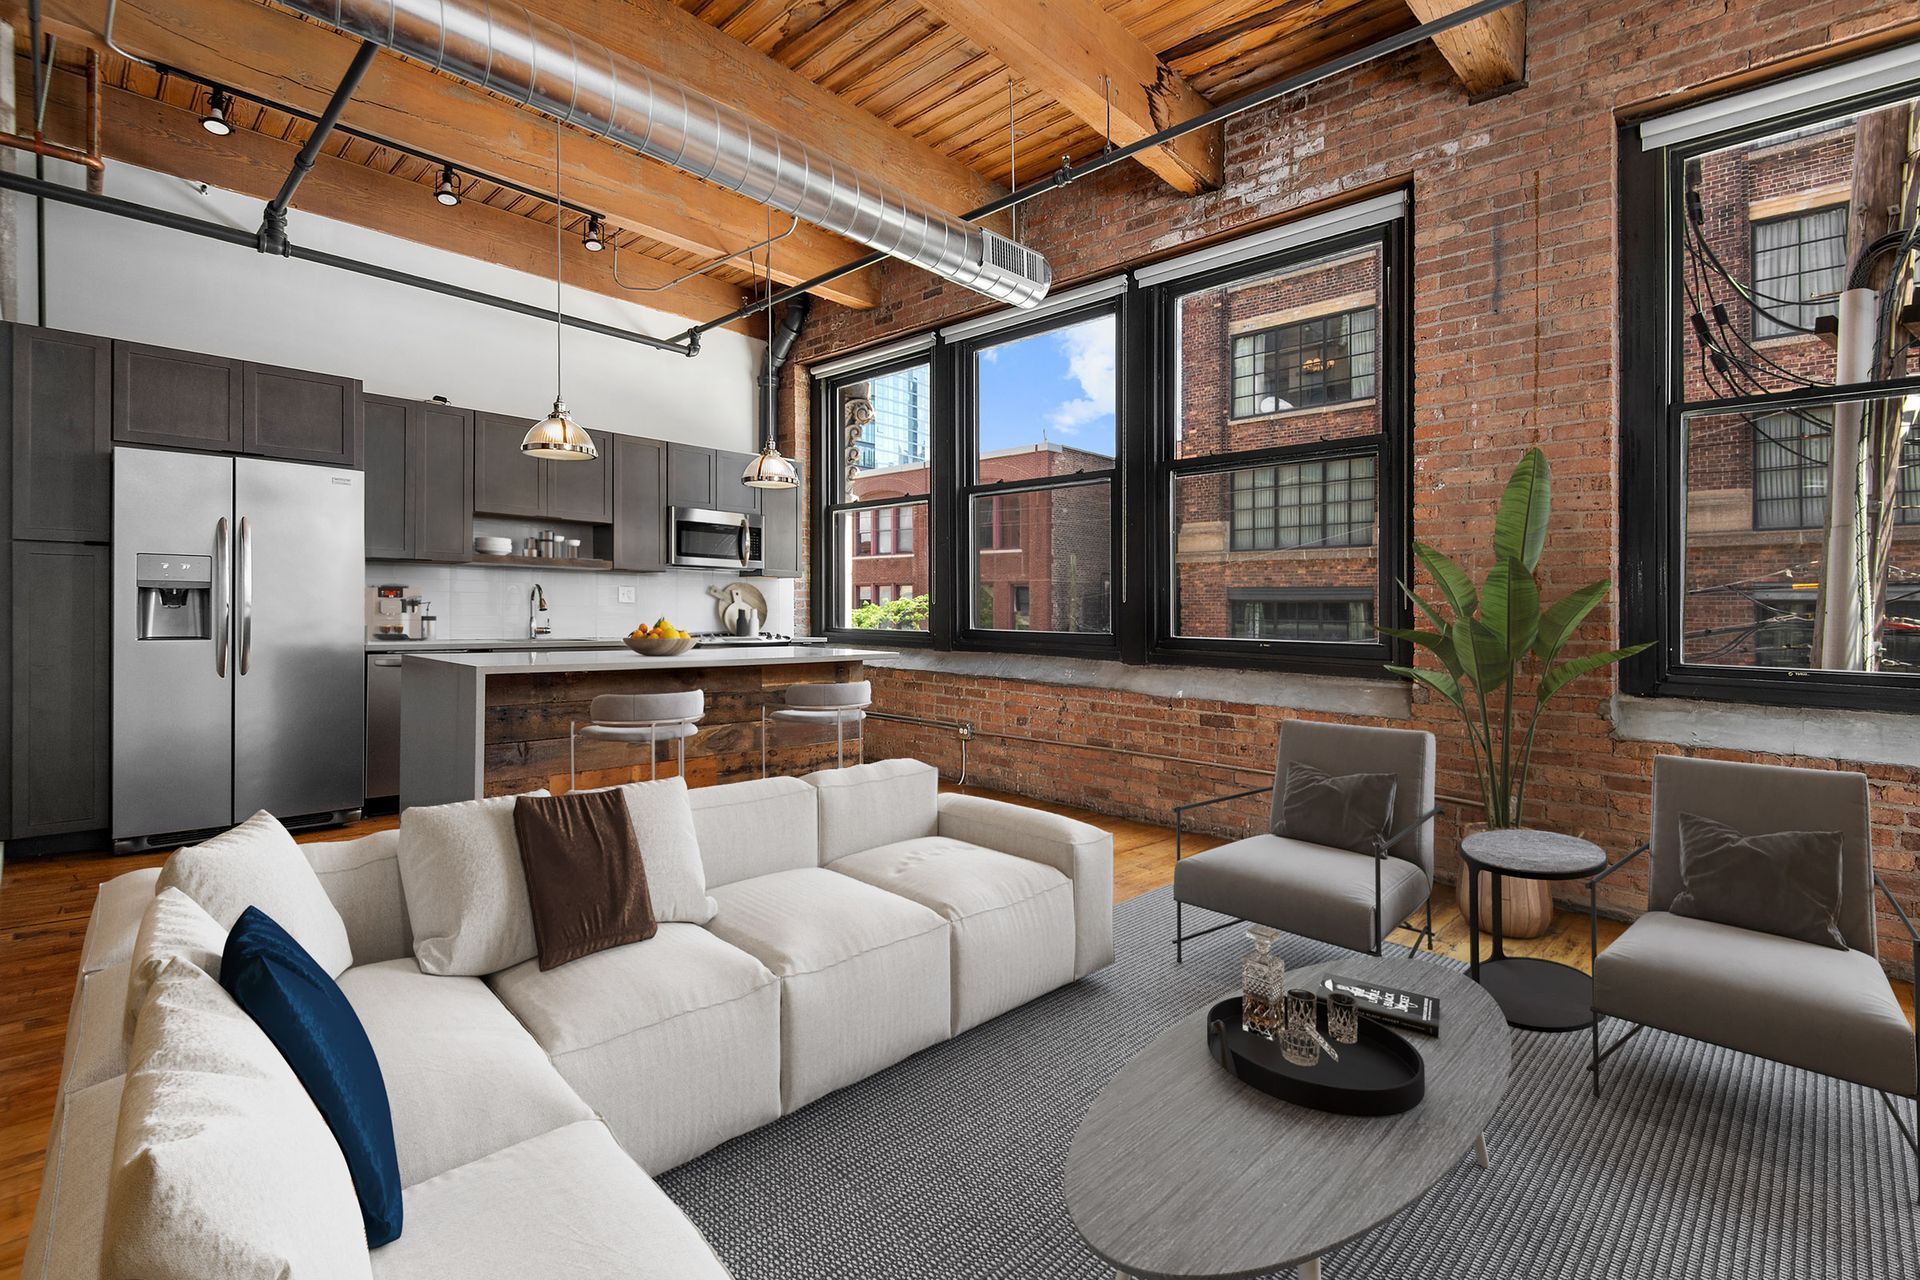 Living room at The Lofts at Gin Alley in Chicago, IL